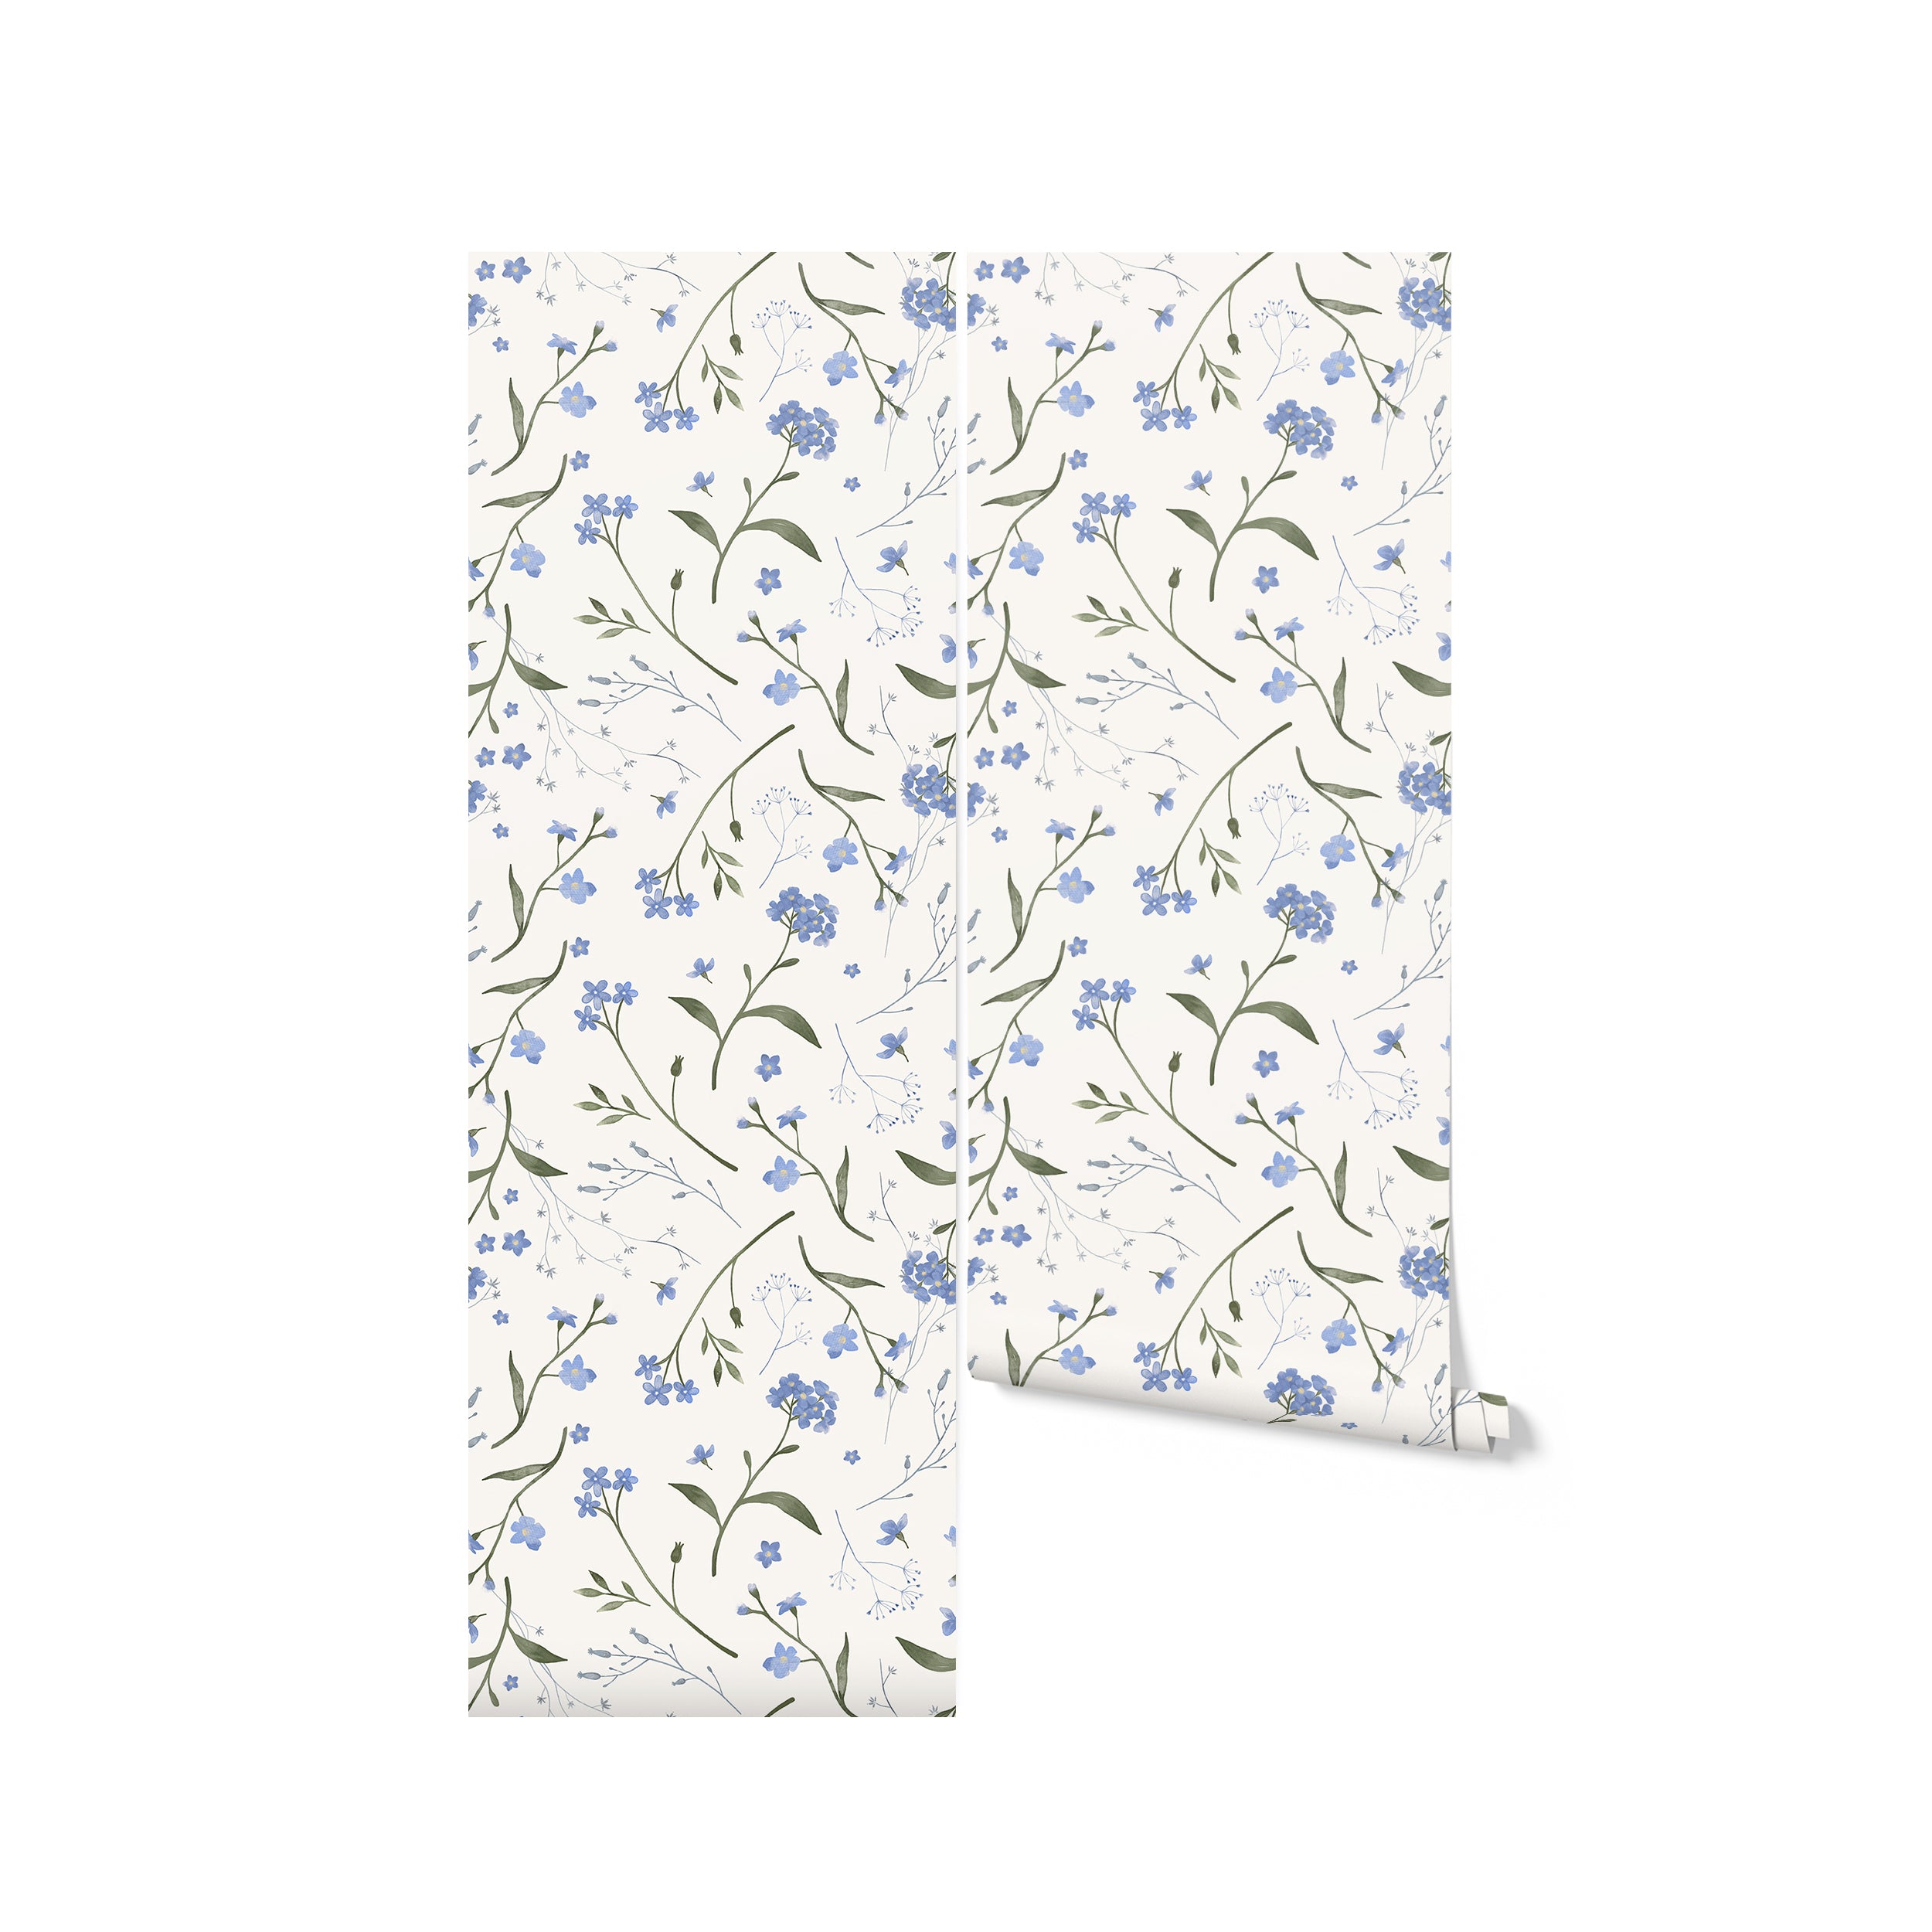 A roll of Wildflower Bouquet Kids Wallpaper, illustrating the wallpaper's intricate design with clusters of small blue wildflowers and sprawling greenery. This image highlights the wallpaper’s potential to transform any room into a charming and whimsical space.